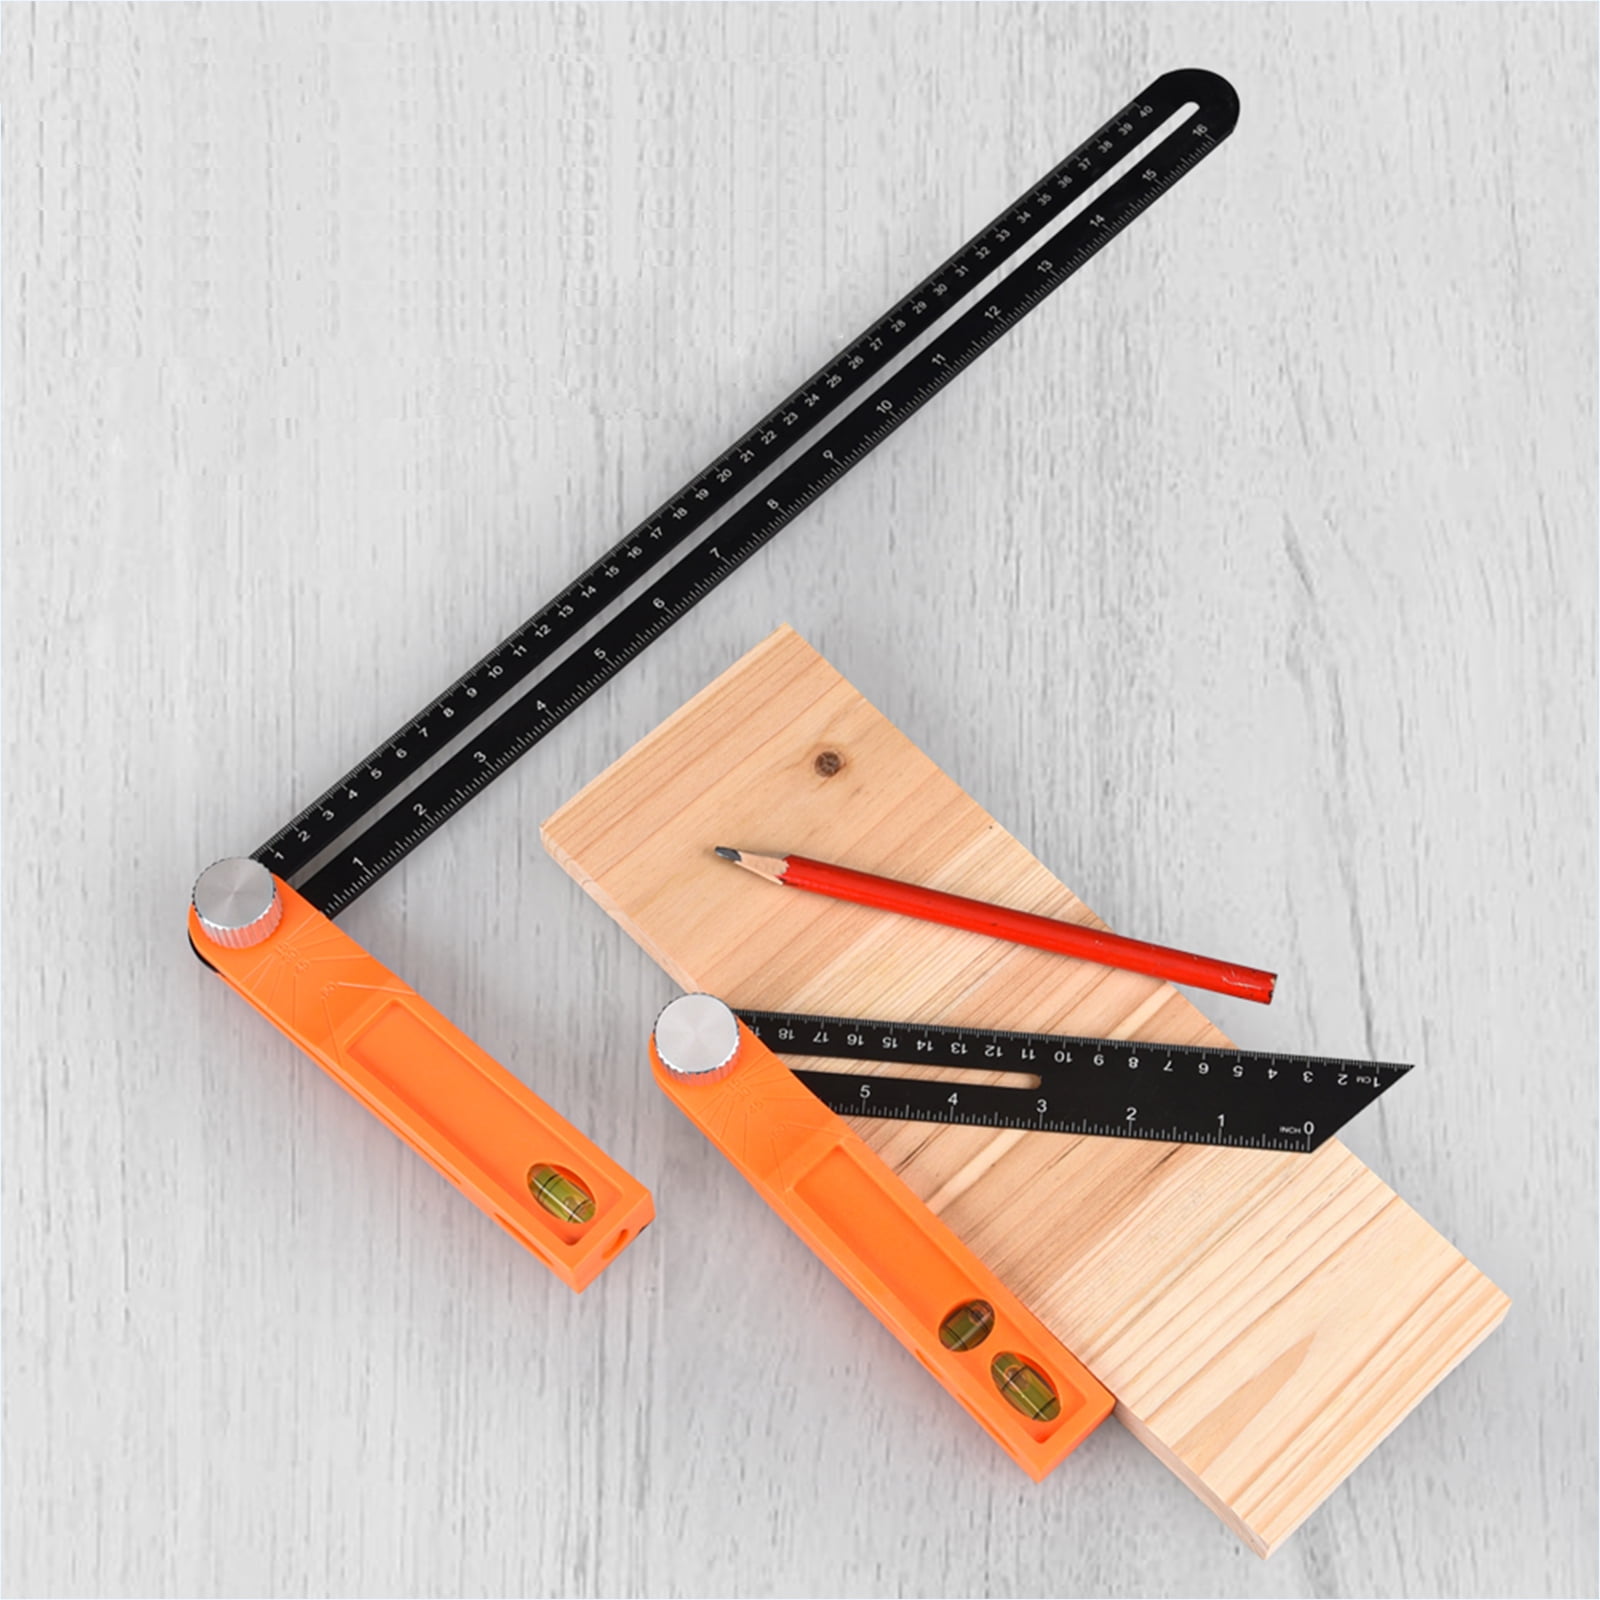 T-Bevel Sliding Angle Ruler Protractor Woodworking Measuring Ruler with Inch/cm Marks ROSEBEAR Activity Angle Ruler